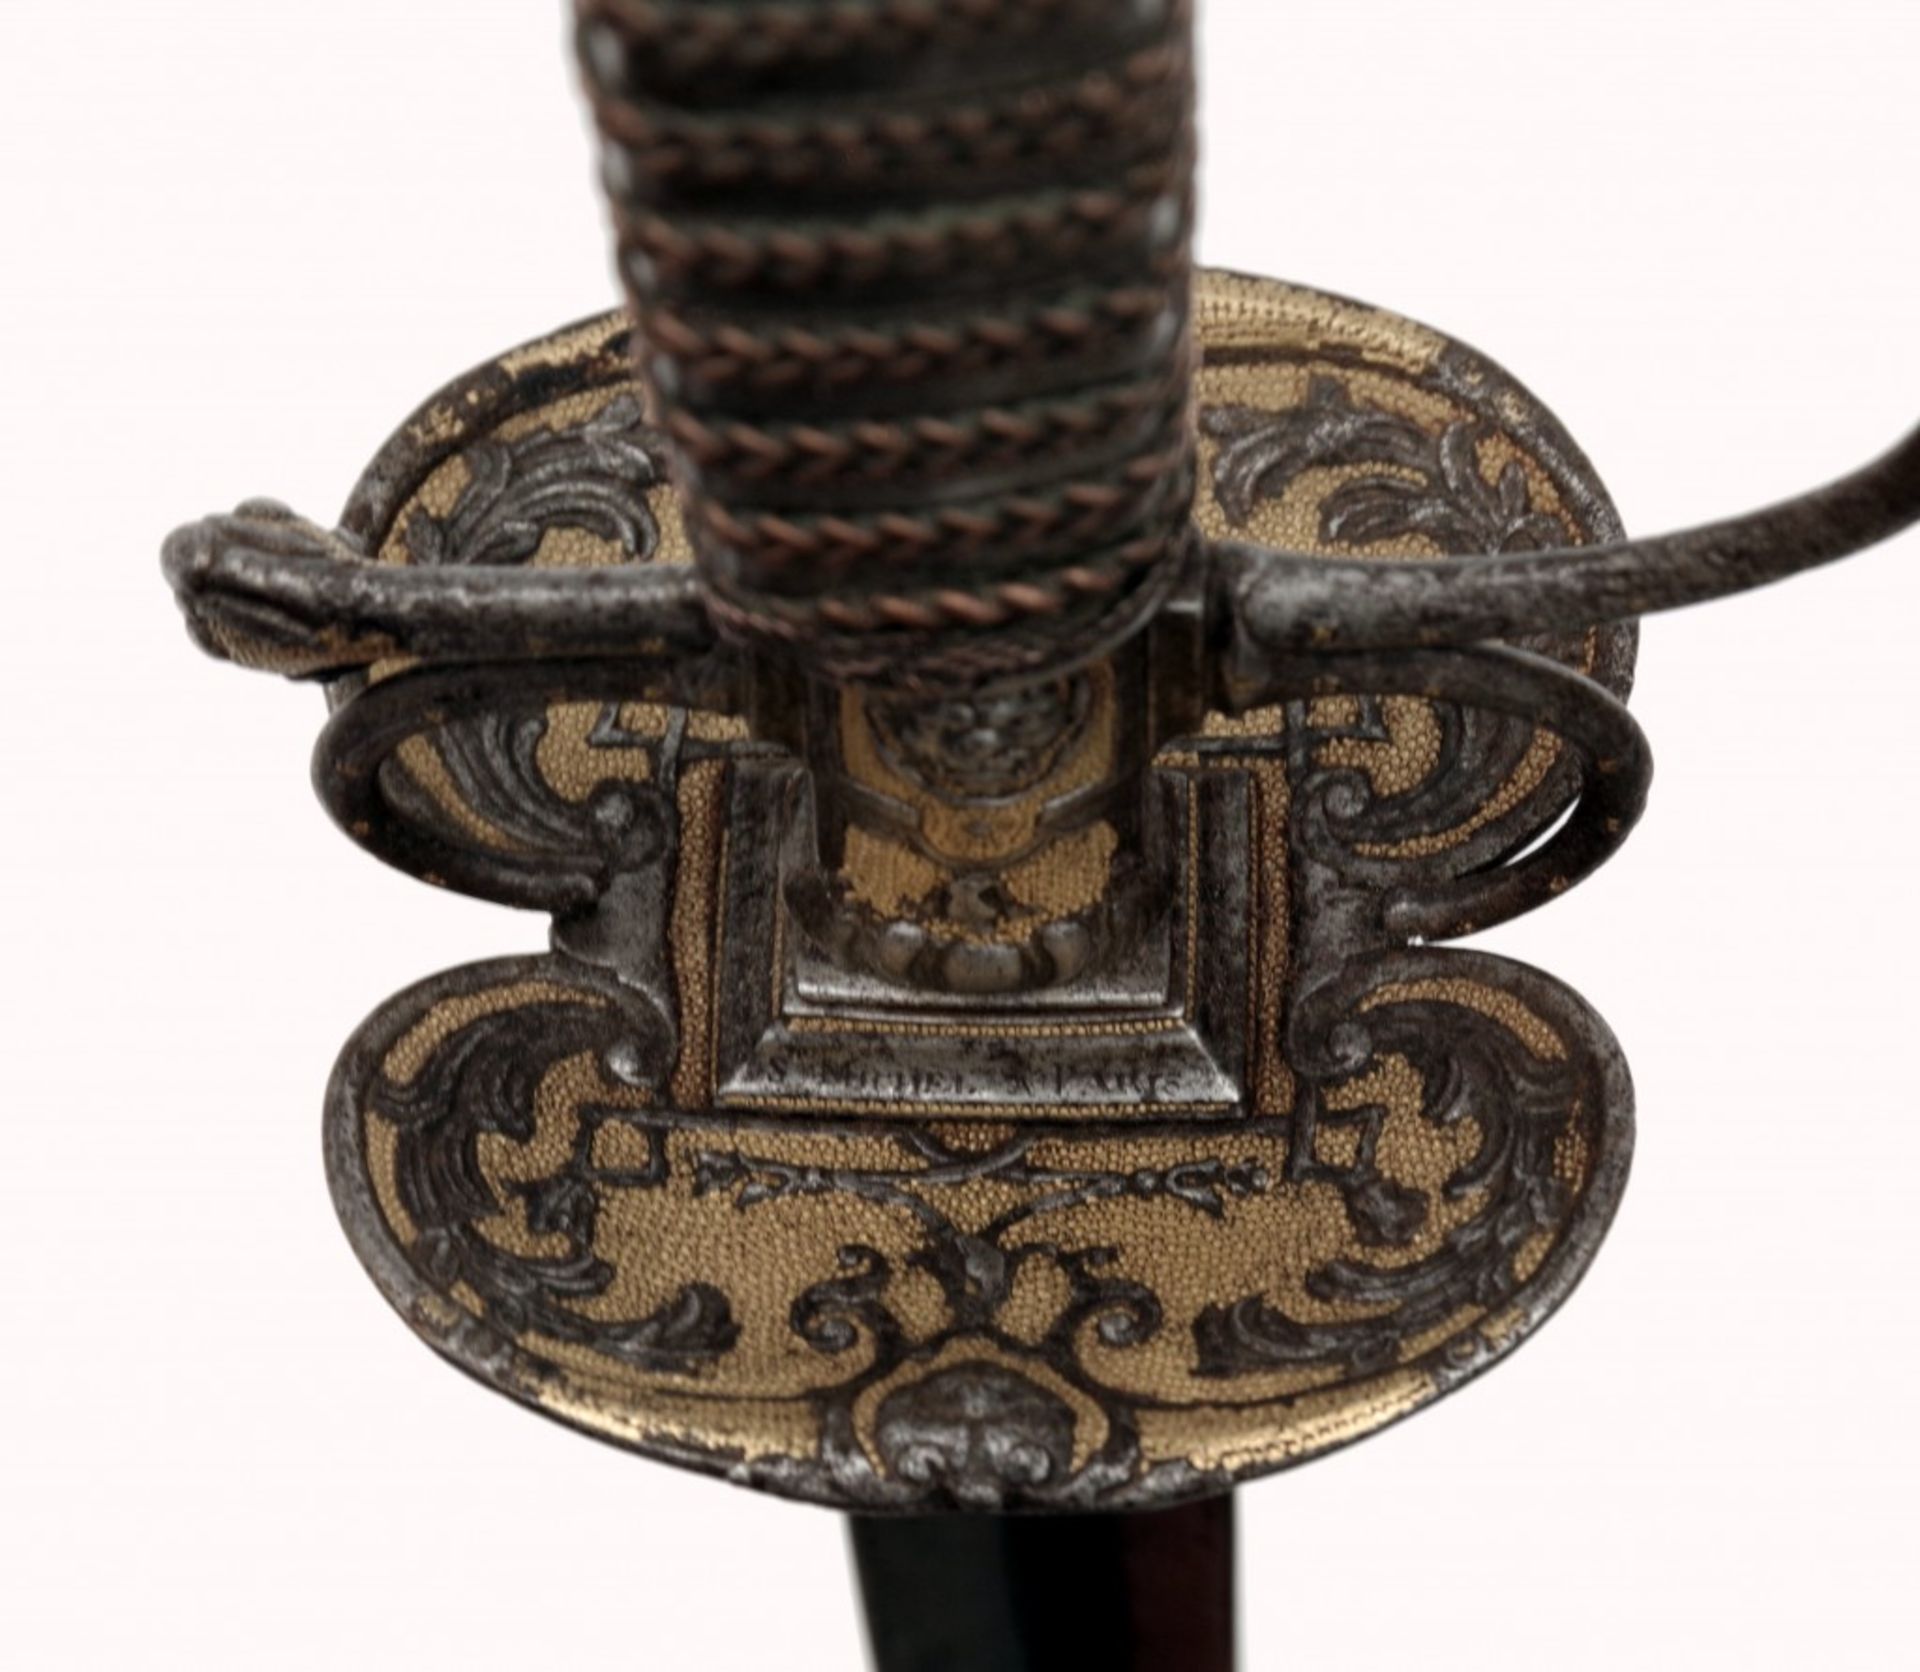 A French Gilt Small-sword with Chiselled Hilt by Jean Louis Guyon the Elder - Image 5 of 11